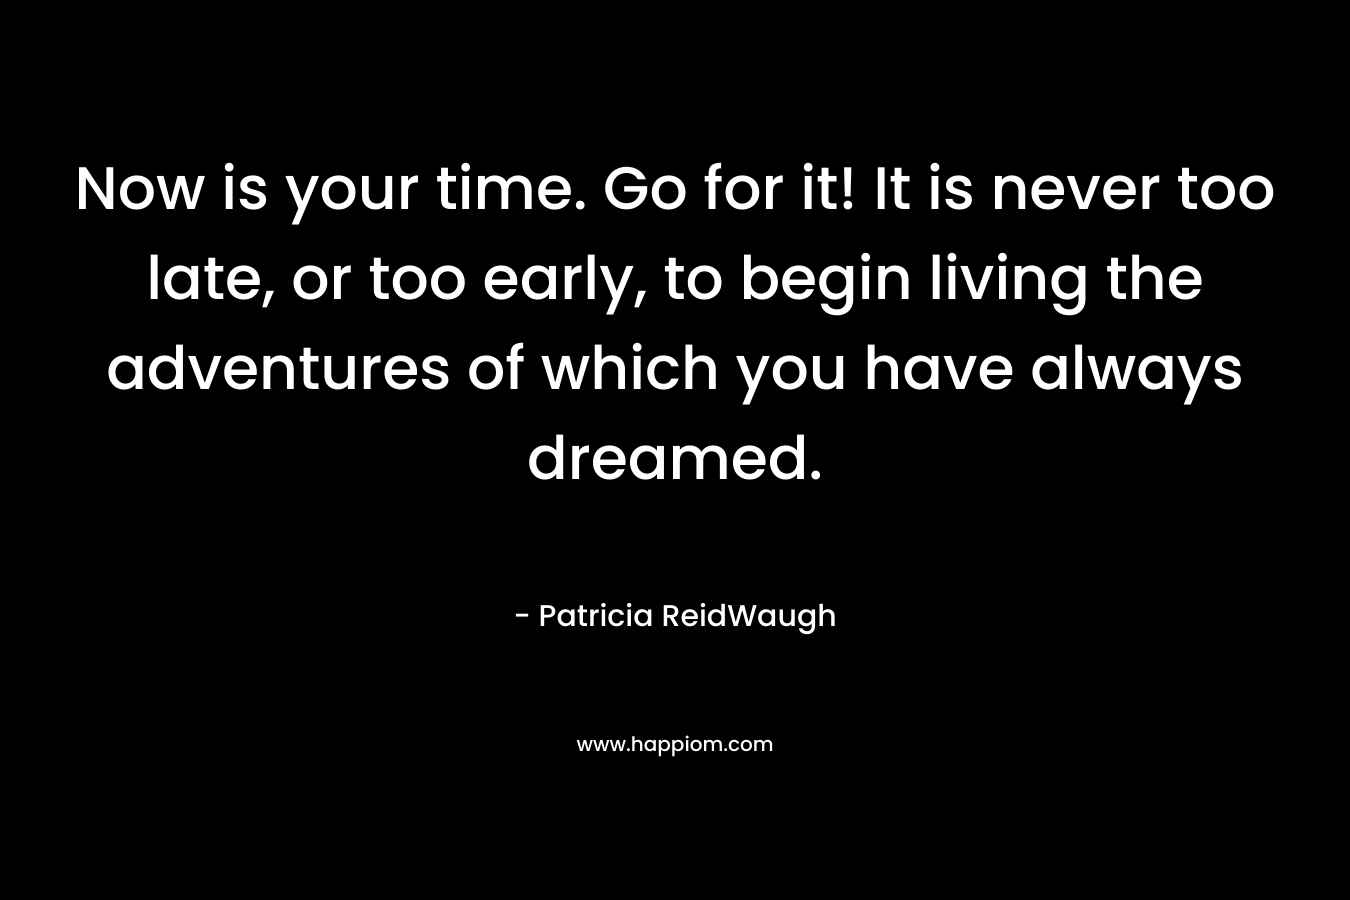 Now is your time. Go for it! It is never too late, or too early, to begin living the adventures of which you have always dreamed.